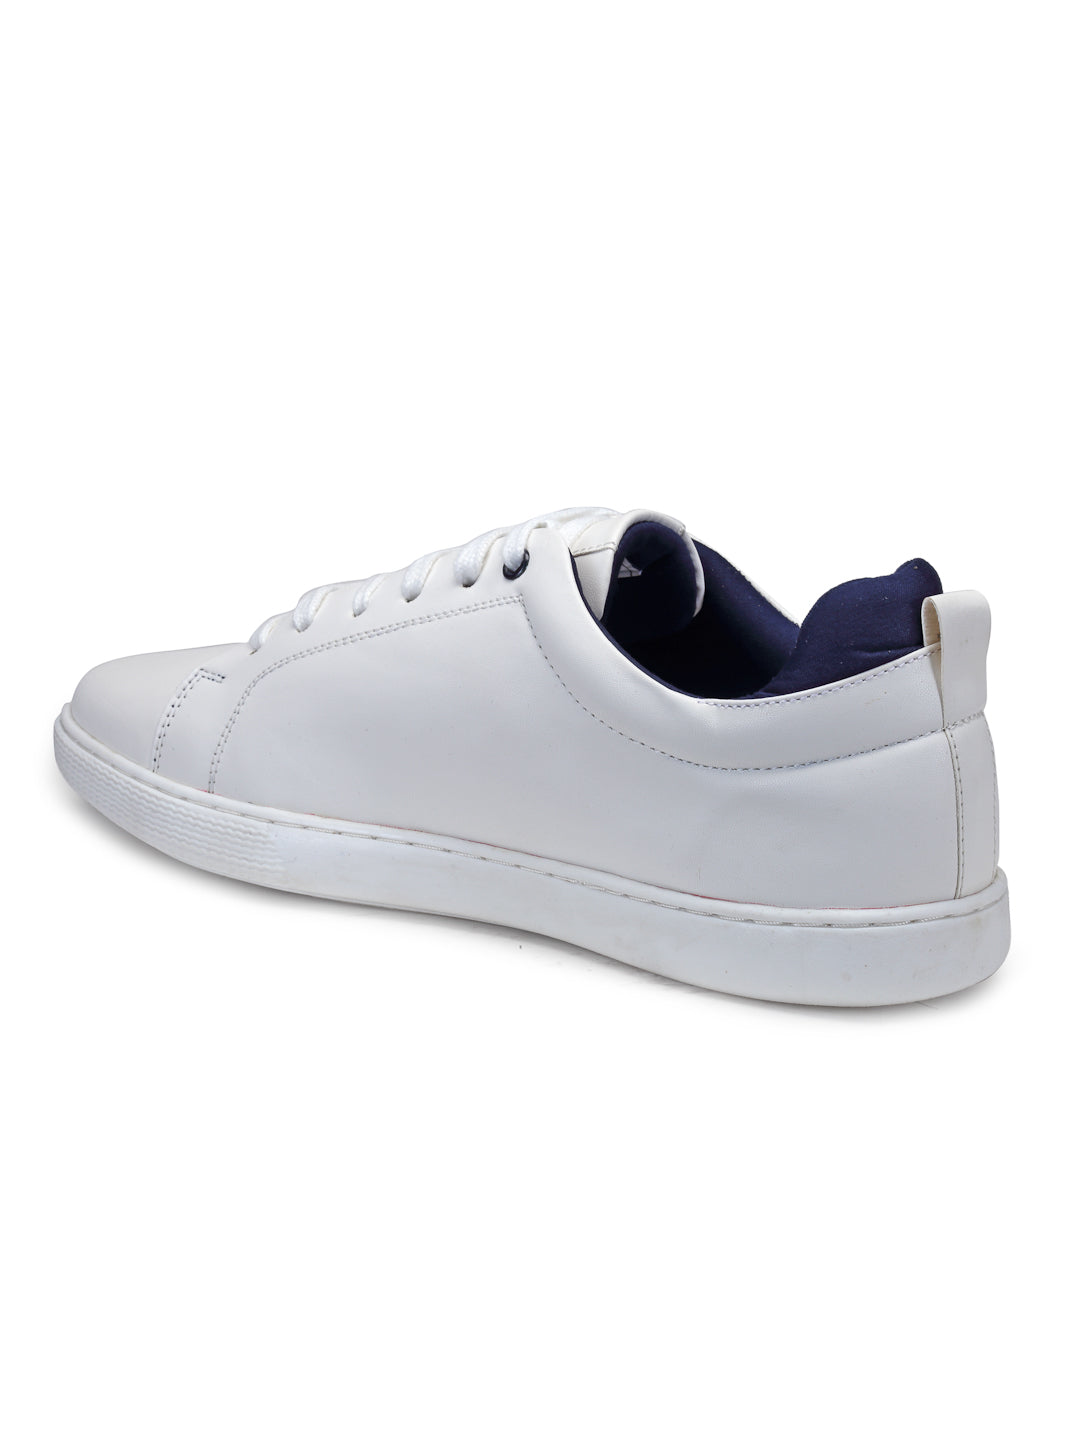 White & Navy Solid Synthetic Leather & Comfort Foam Lace Up Sneakers For Men